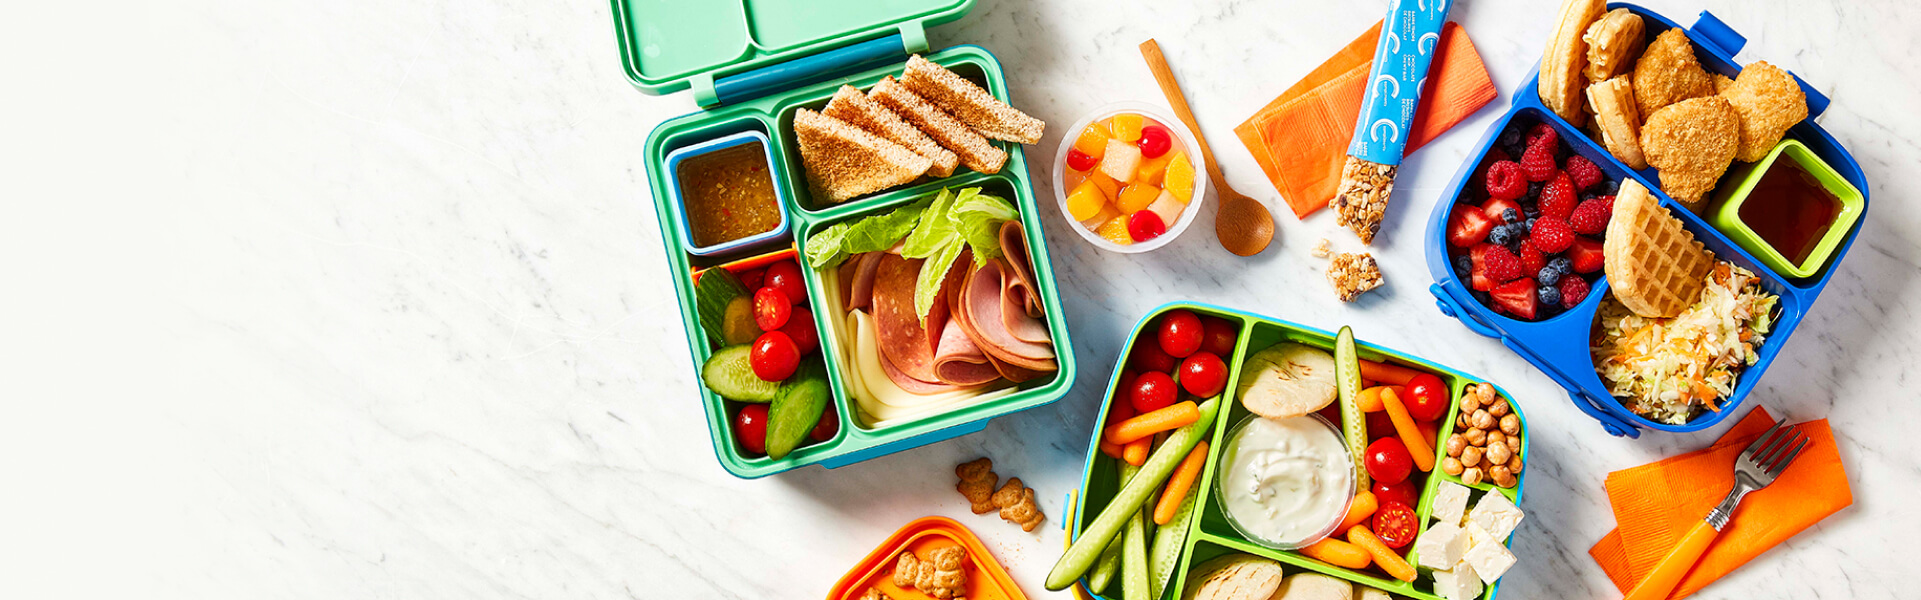 three bento lunch boxes filled with different kid's school lunches on a marble surface